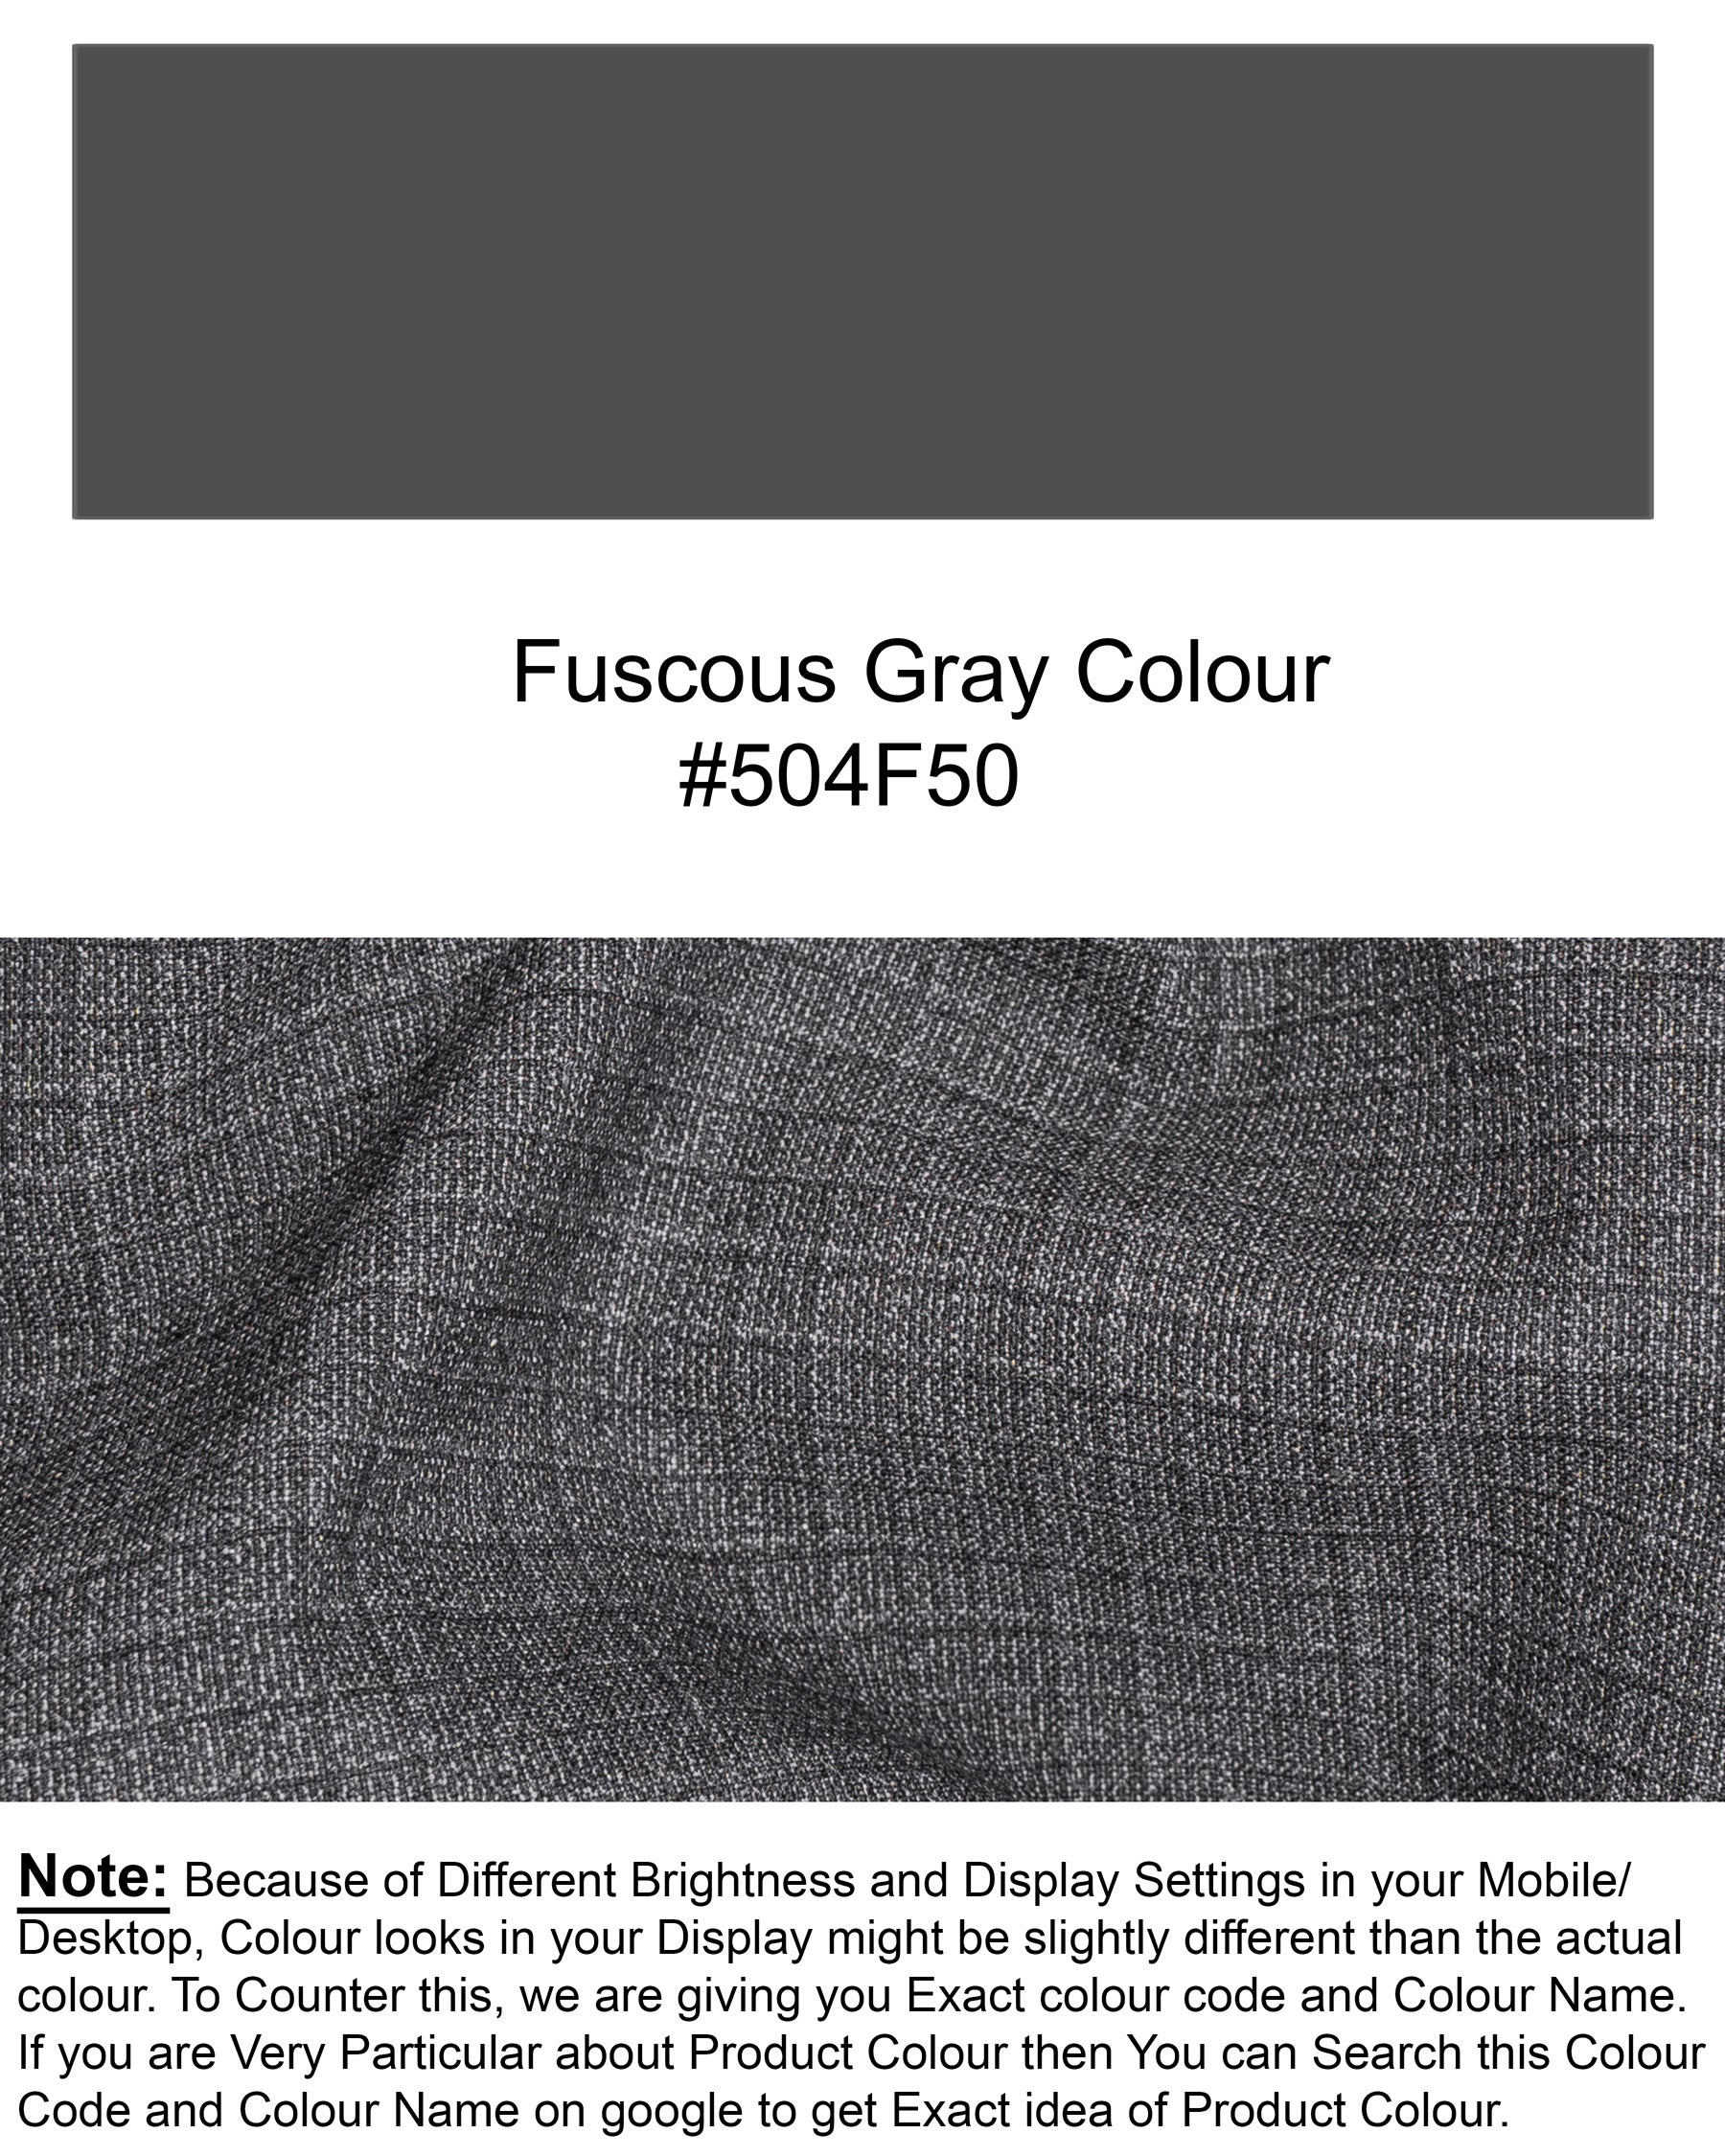 Fuscous Gray Chequered DouSTe Breasted Wool Rich Sports Suit ST1448-DB-PP-36,ST1448-DB-PP-38,ST1448-DB-PP-40,ST1448-DB-PP-42,ST1448-DB-PP-44,ST1448-DB-PP-46,ST1448-DB-PP-48,ST1448-DB-PP-50,ST1448-DB-PP-52,ST1448-DB-PP-54,ST1448-DB-PP-56,ST1448-DB-PP-58,ST1448-DB-PP-60